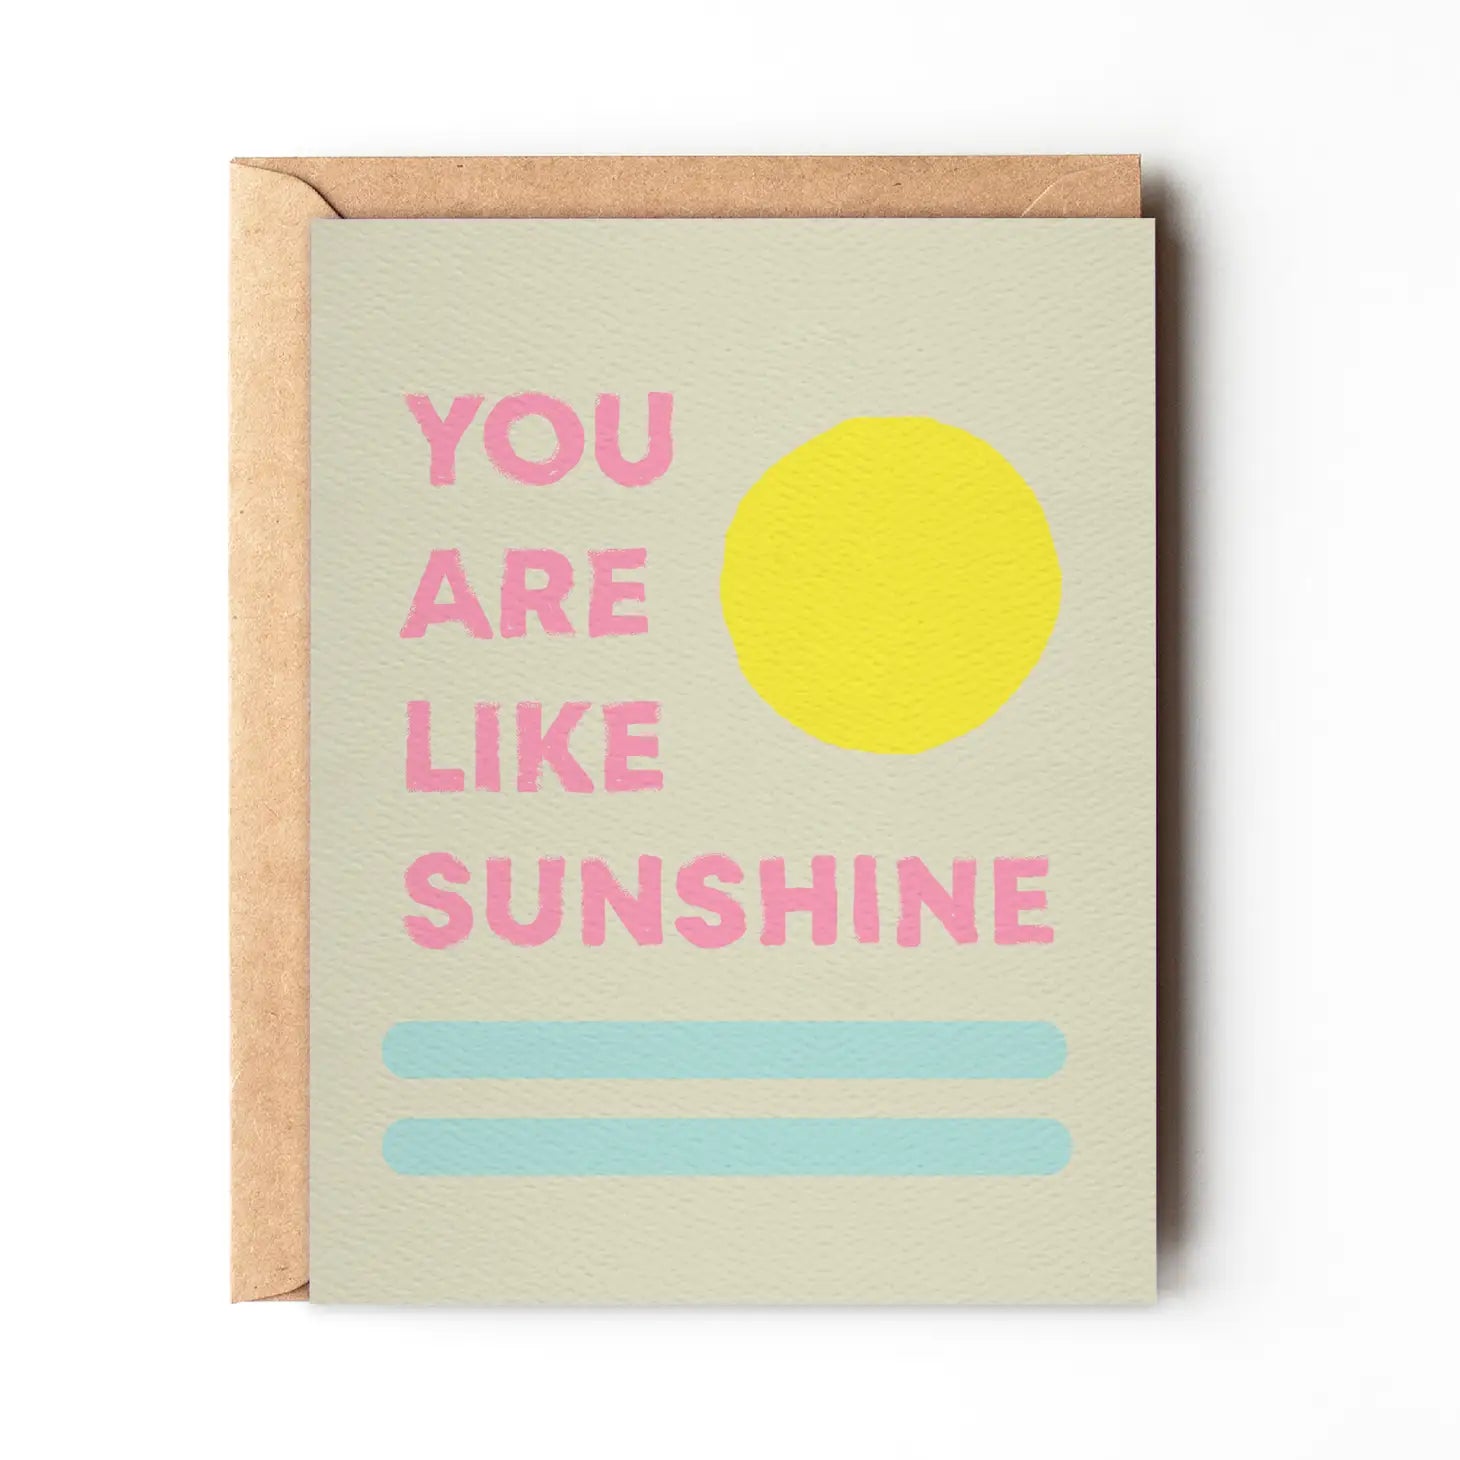 You Are Like Sunshine - Summer Love and Friendship Card